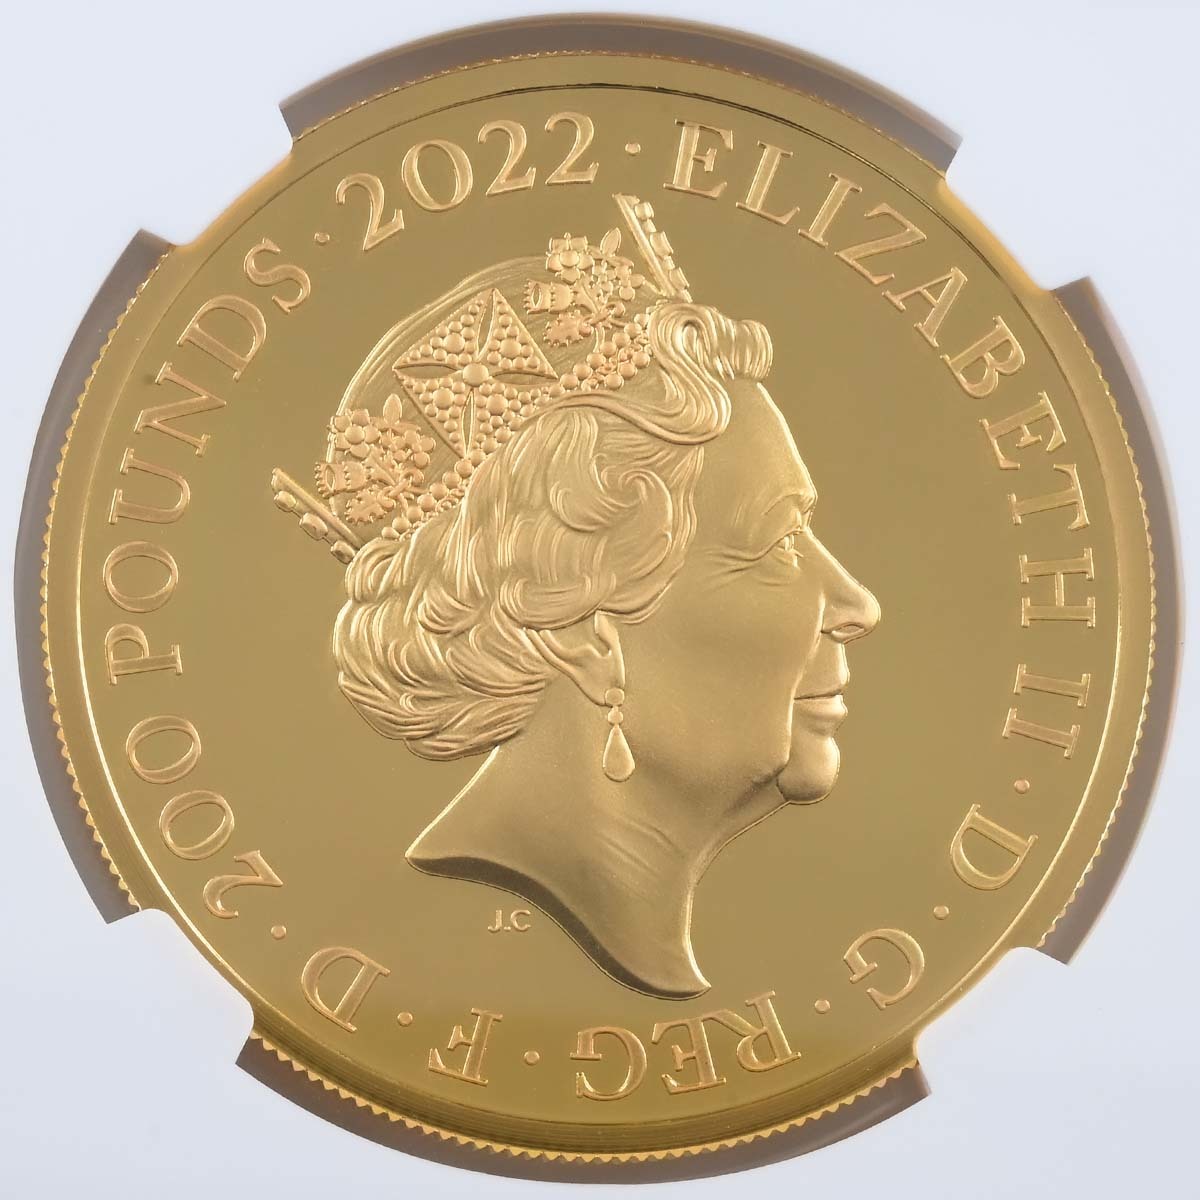 UK22H7G20 2022 British Monarchs Henry VII 2 Ounce Gold Proof PF 70 Obverse